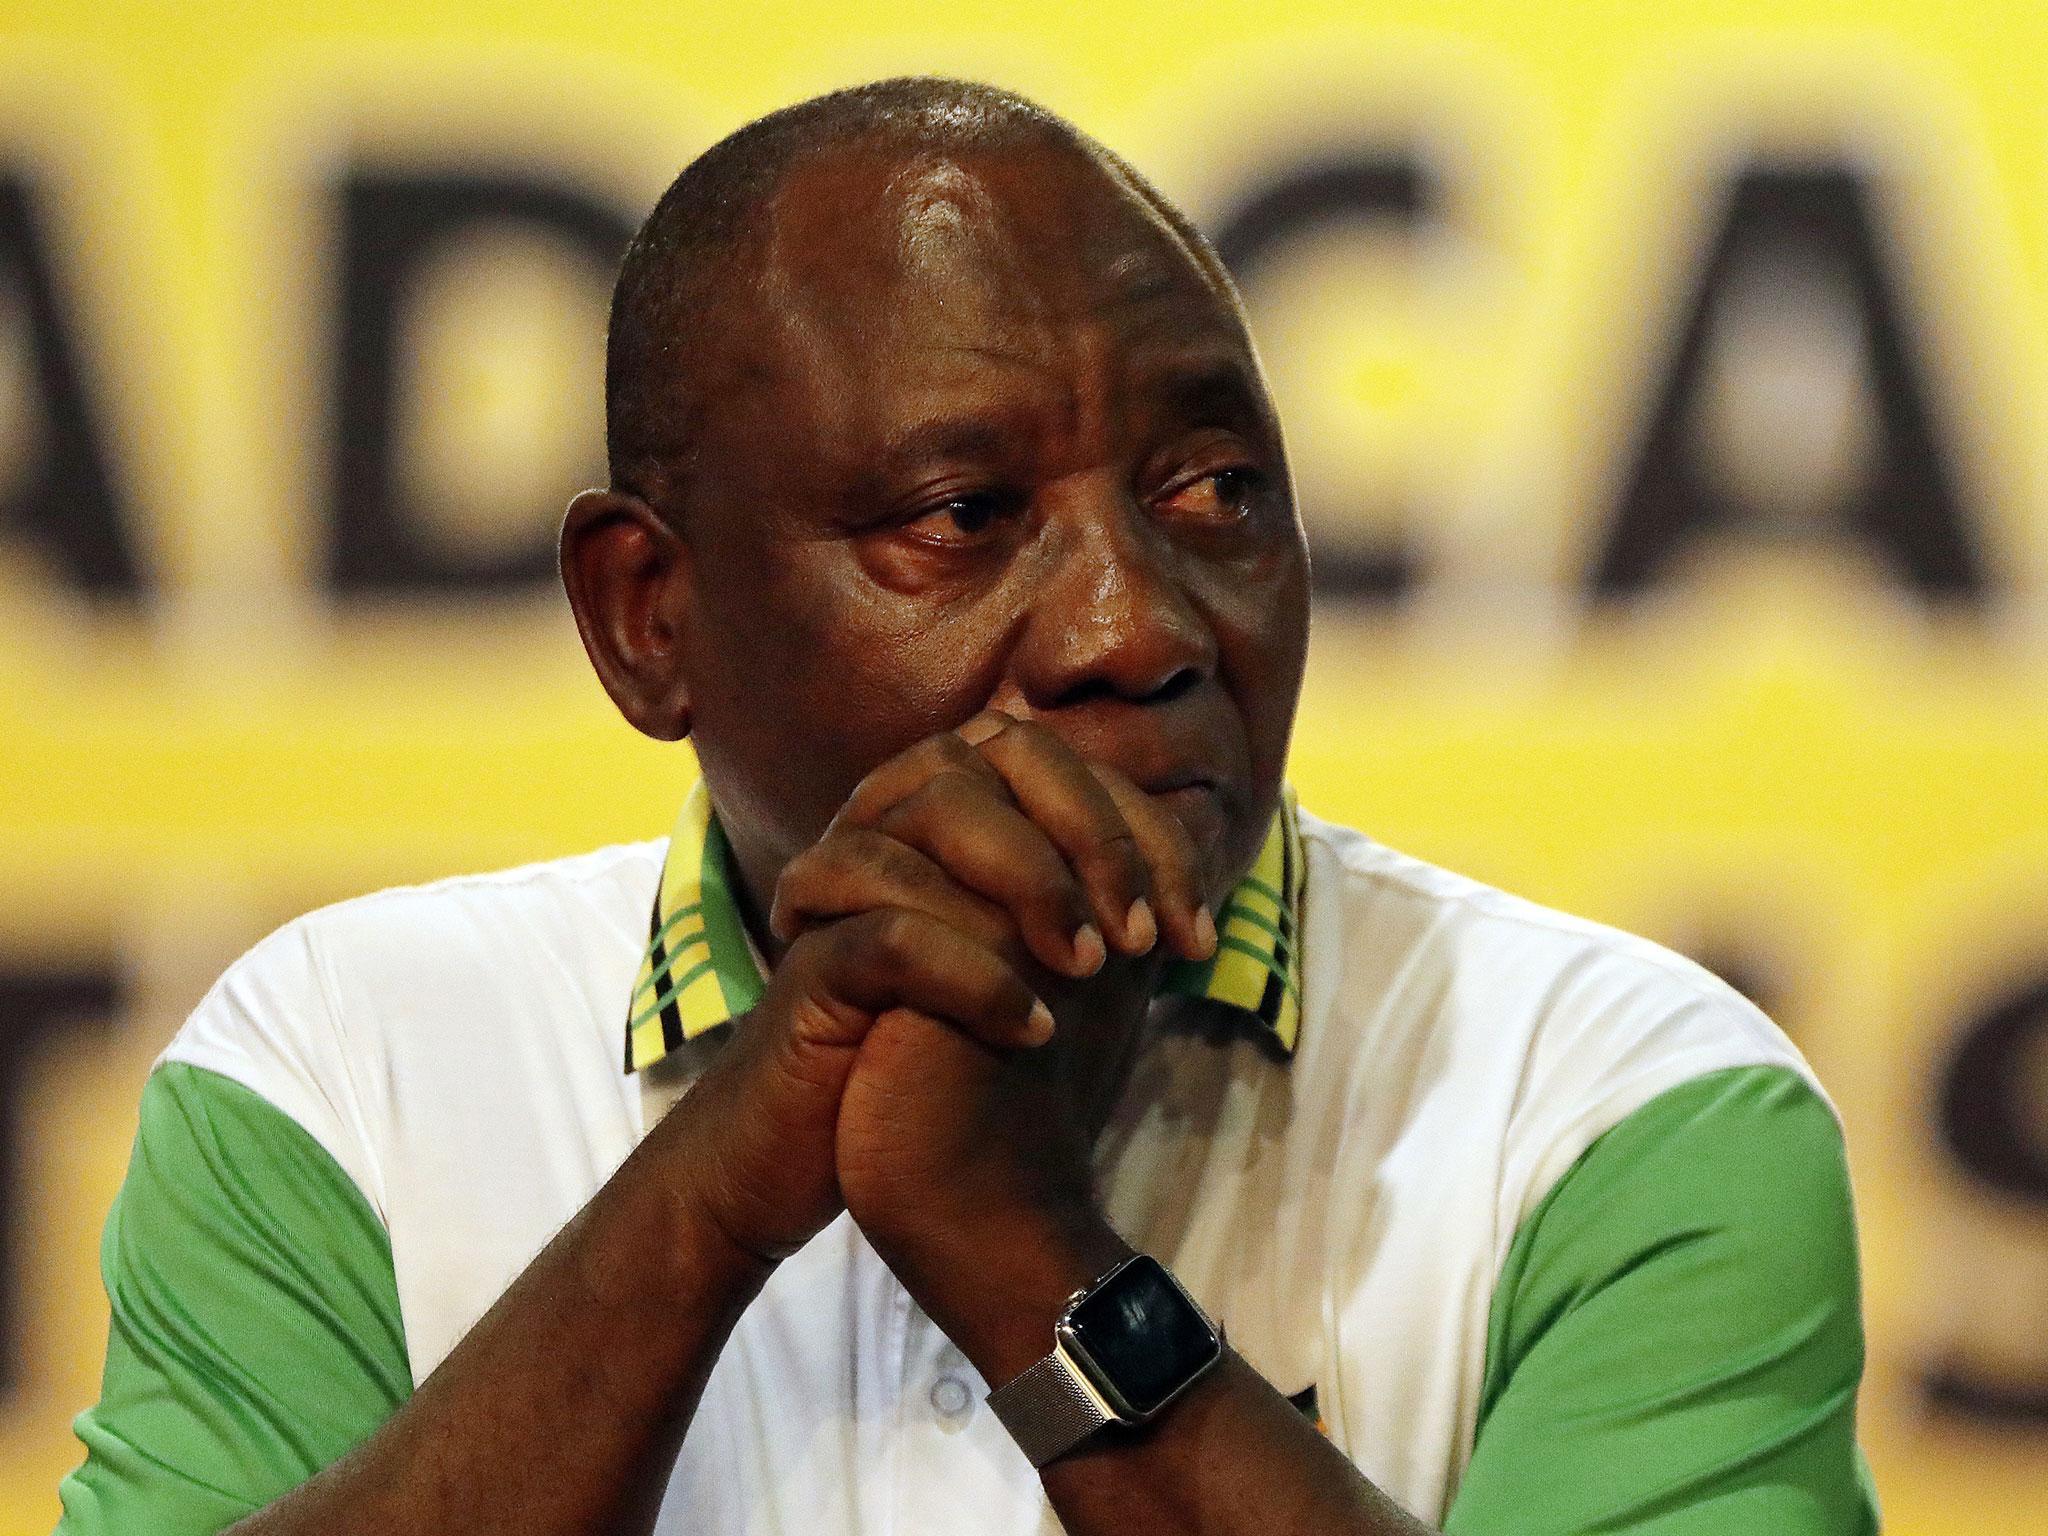 Cyril Ramaphosa became emotional after it was announced he had won the vote at the ANC's elective conference in Johannesburg